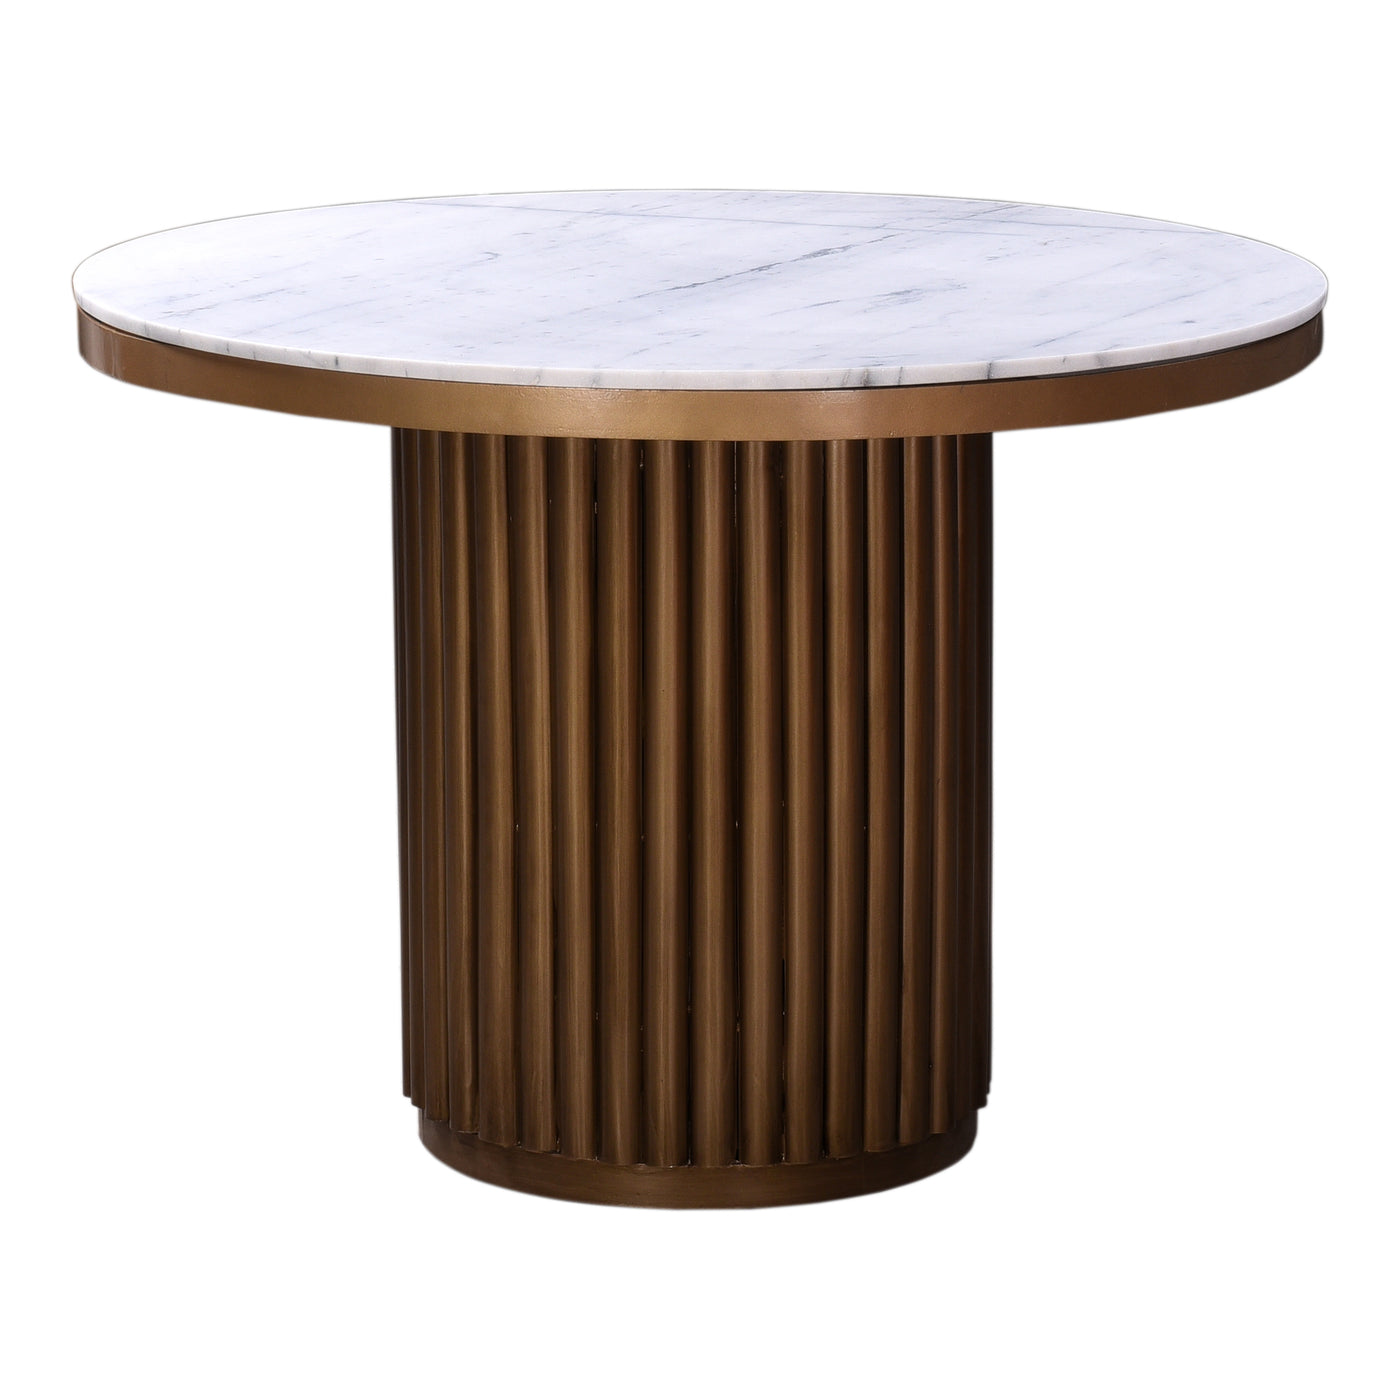 Inspired by Roman architecture, the Tower dining table features a brass-finished pillar base holding up a beautiful white ...